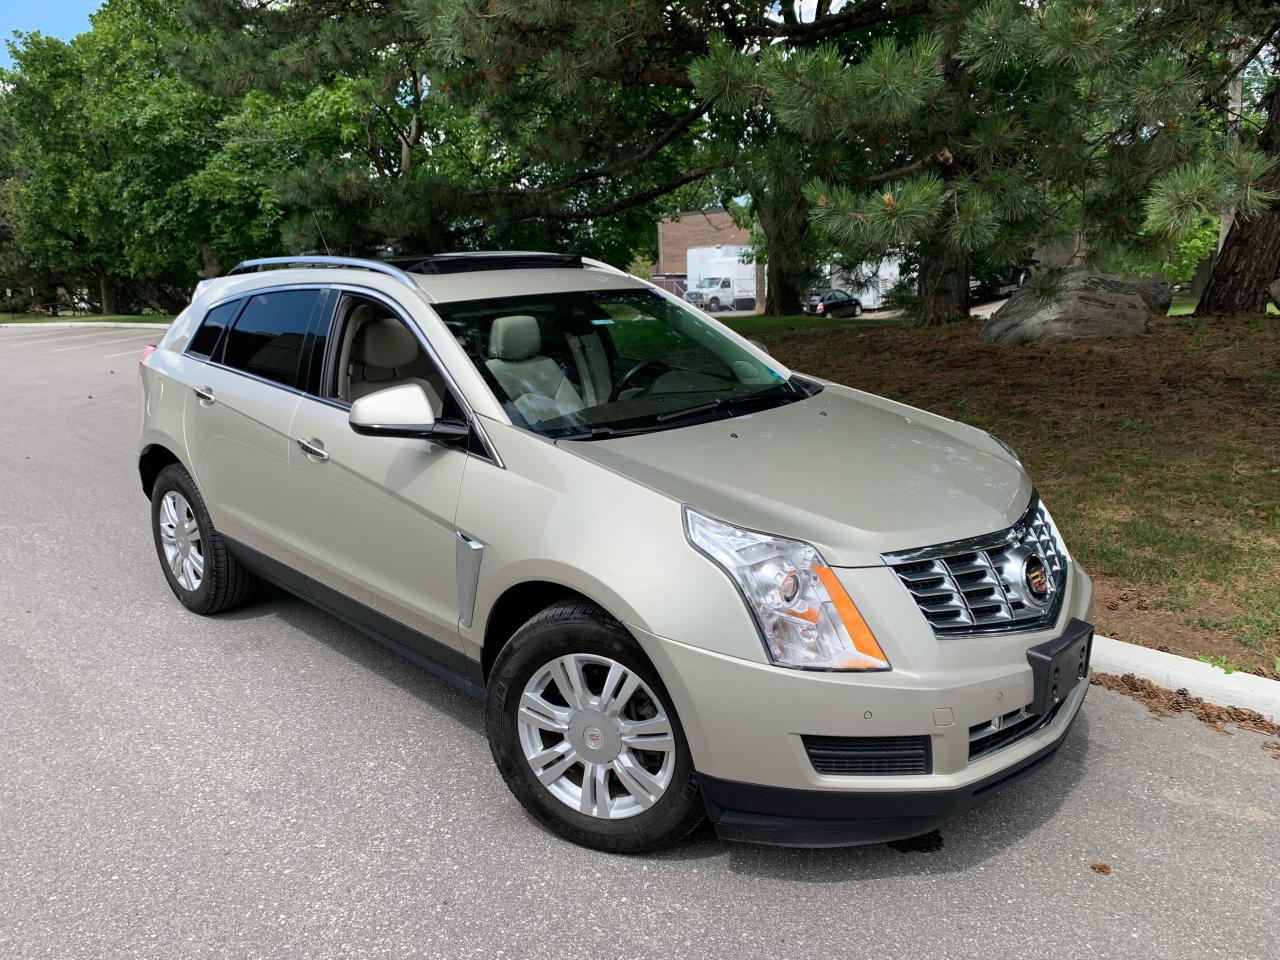 2015 Cadillac SRX LUXURY-ONLY 31,474 KMS!! 1 SENIOR OWNER! NO CLAIMS - Photo #1